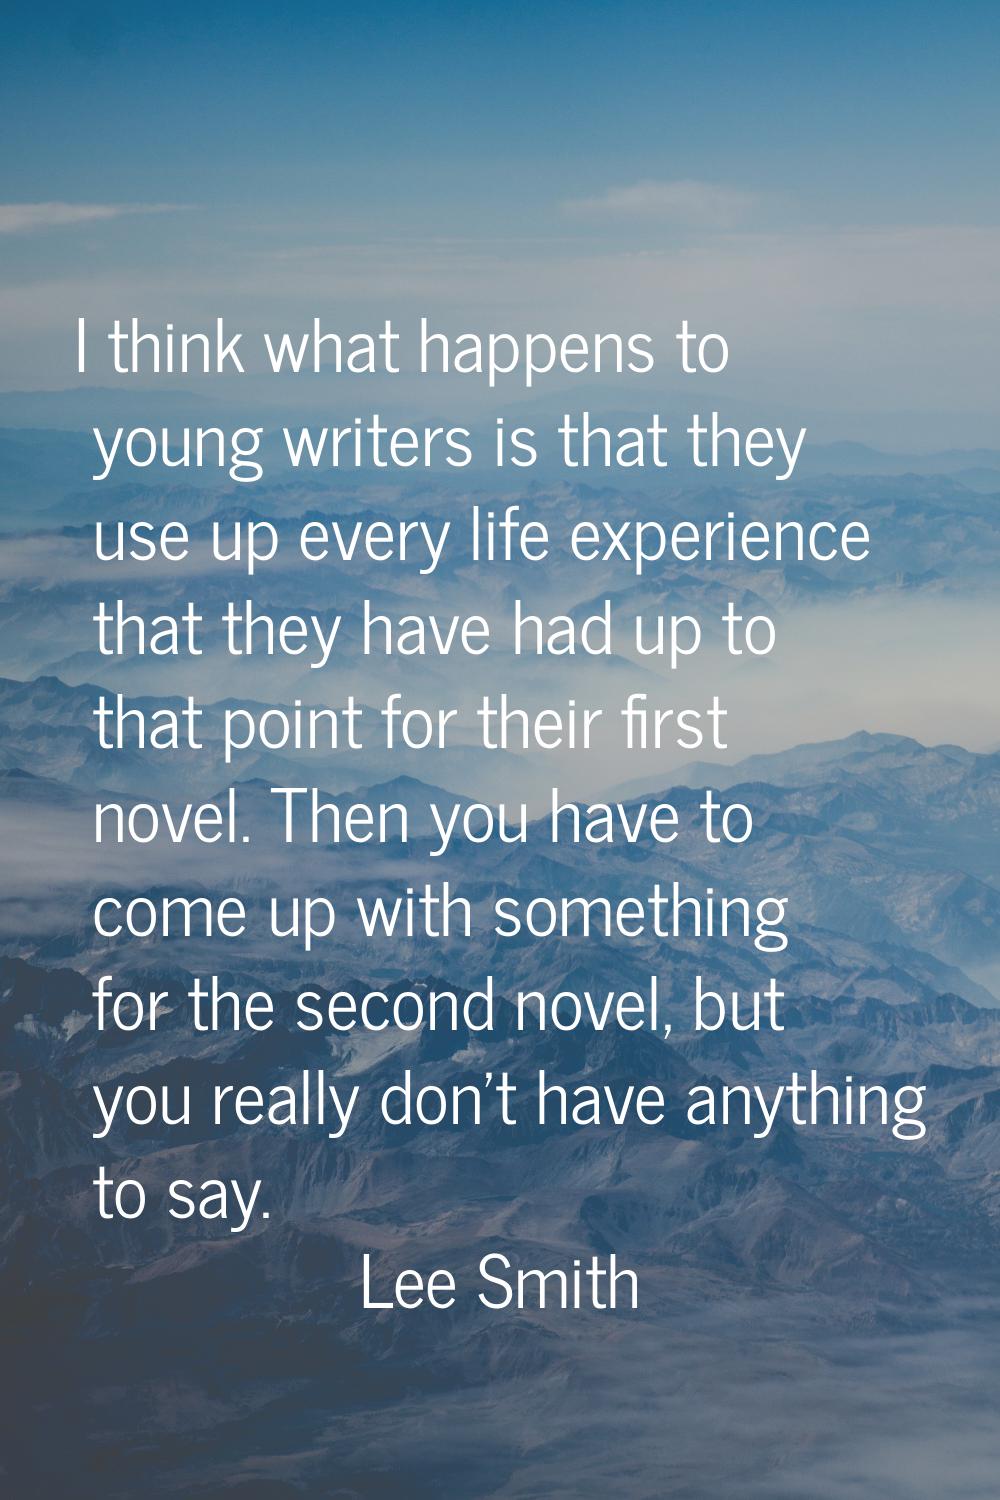 I think what happens to young writers is that they use up every life experience that they have had 